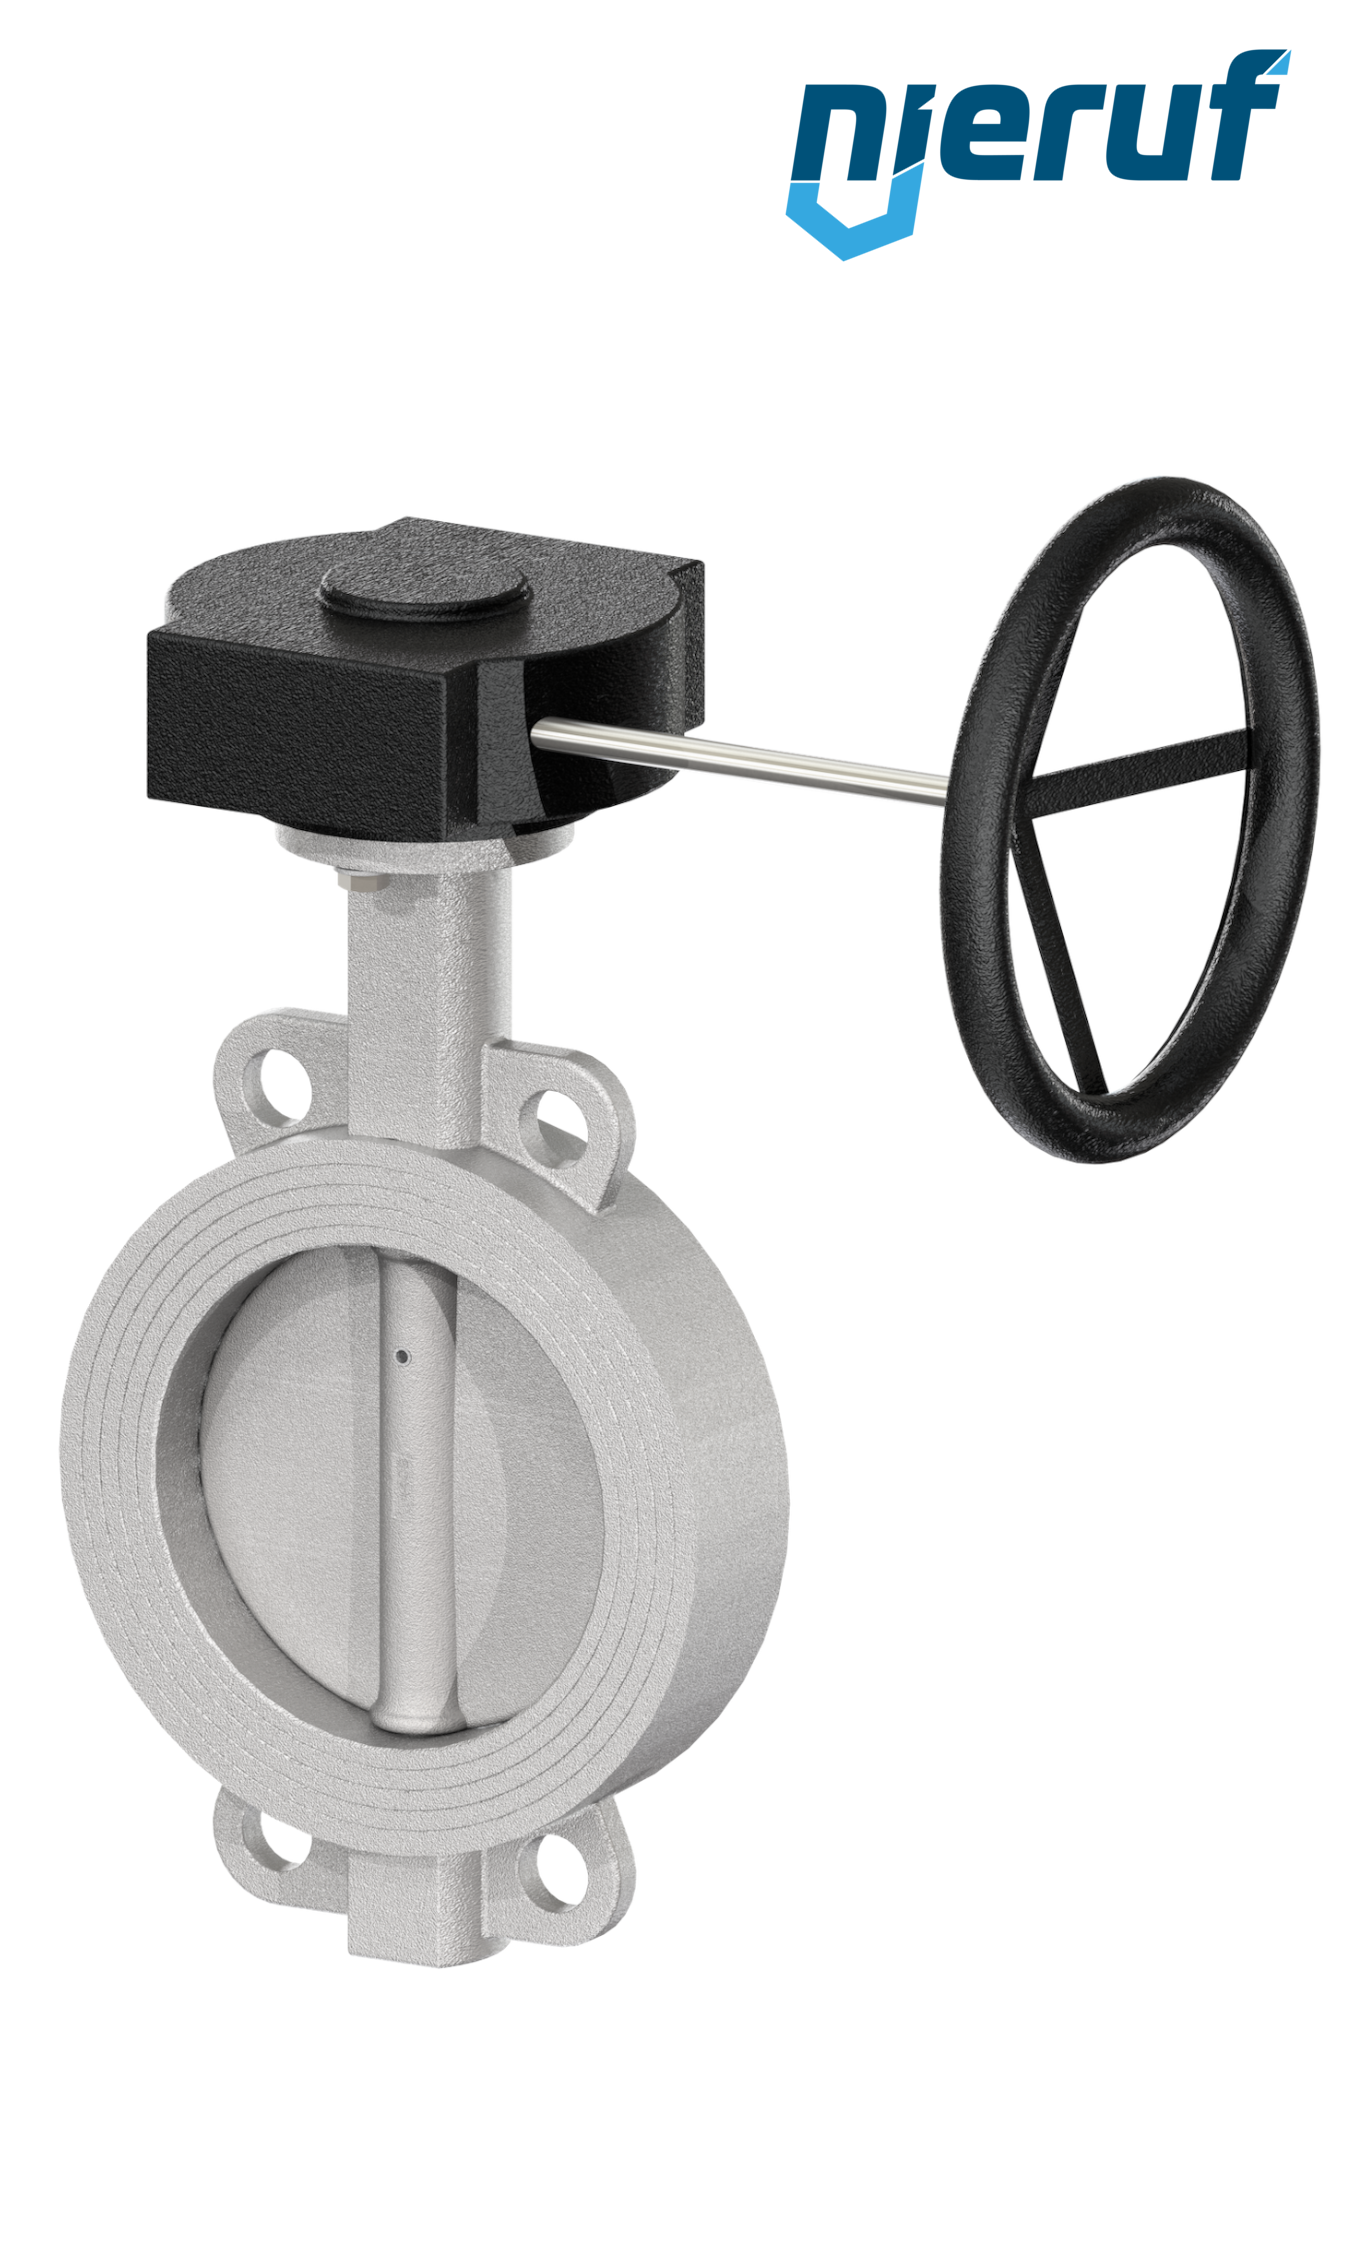 Butterfly-valve-stainless-steel DN 65 PN16 AK08 metall gearbox